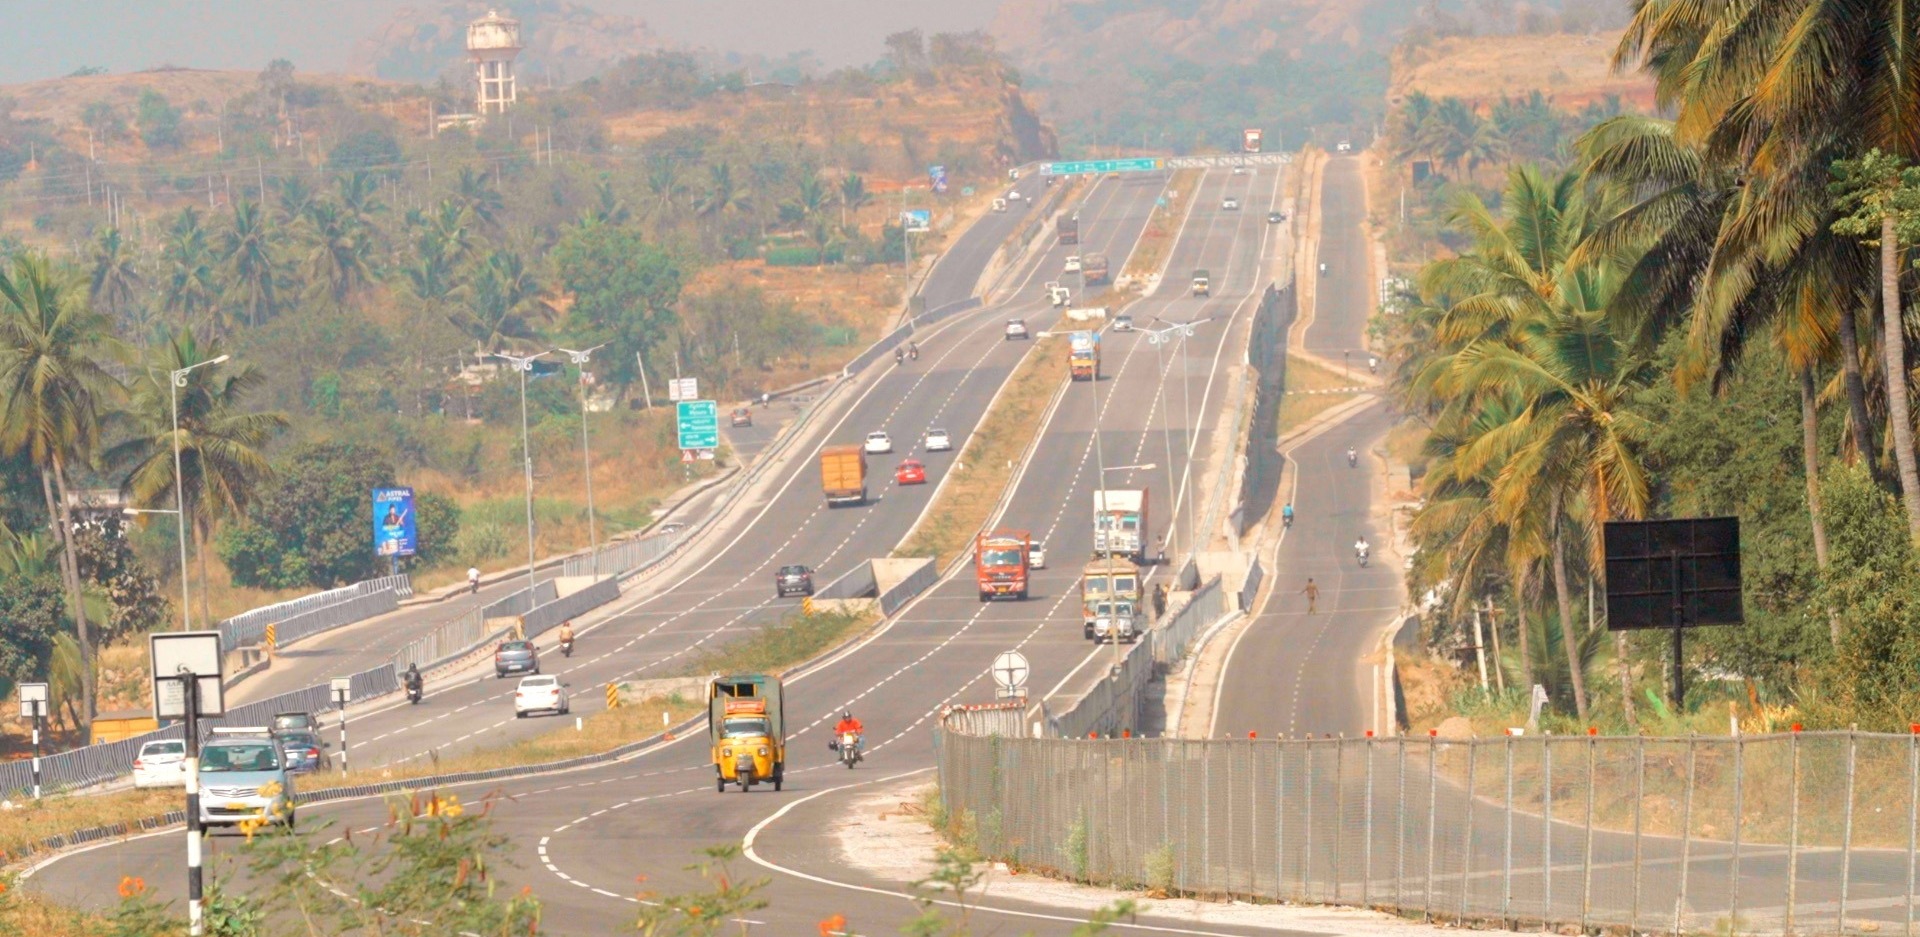 Due to this expressway built at a cost of 8480 crores, the 3-hour journey will be cut in 75 minutes.